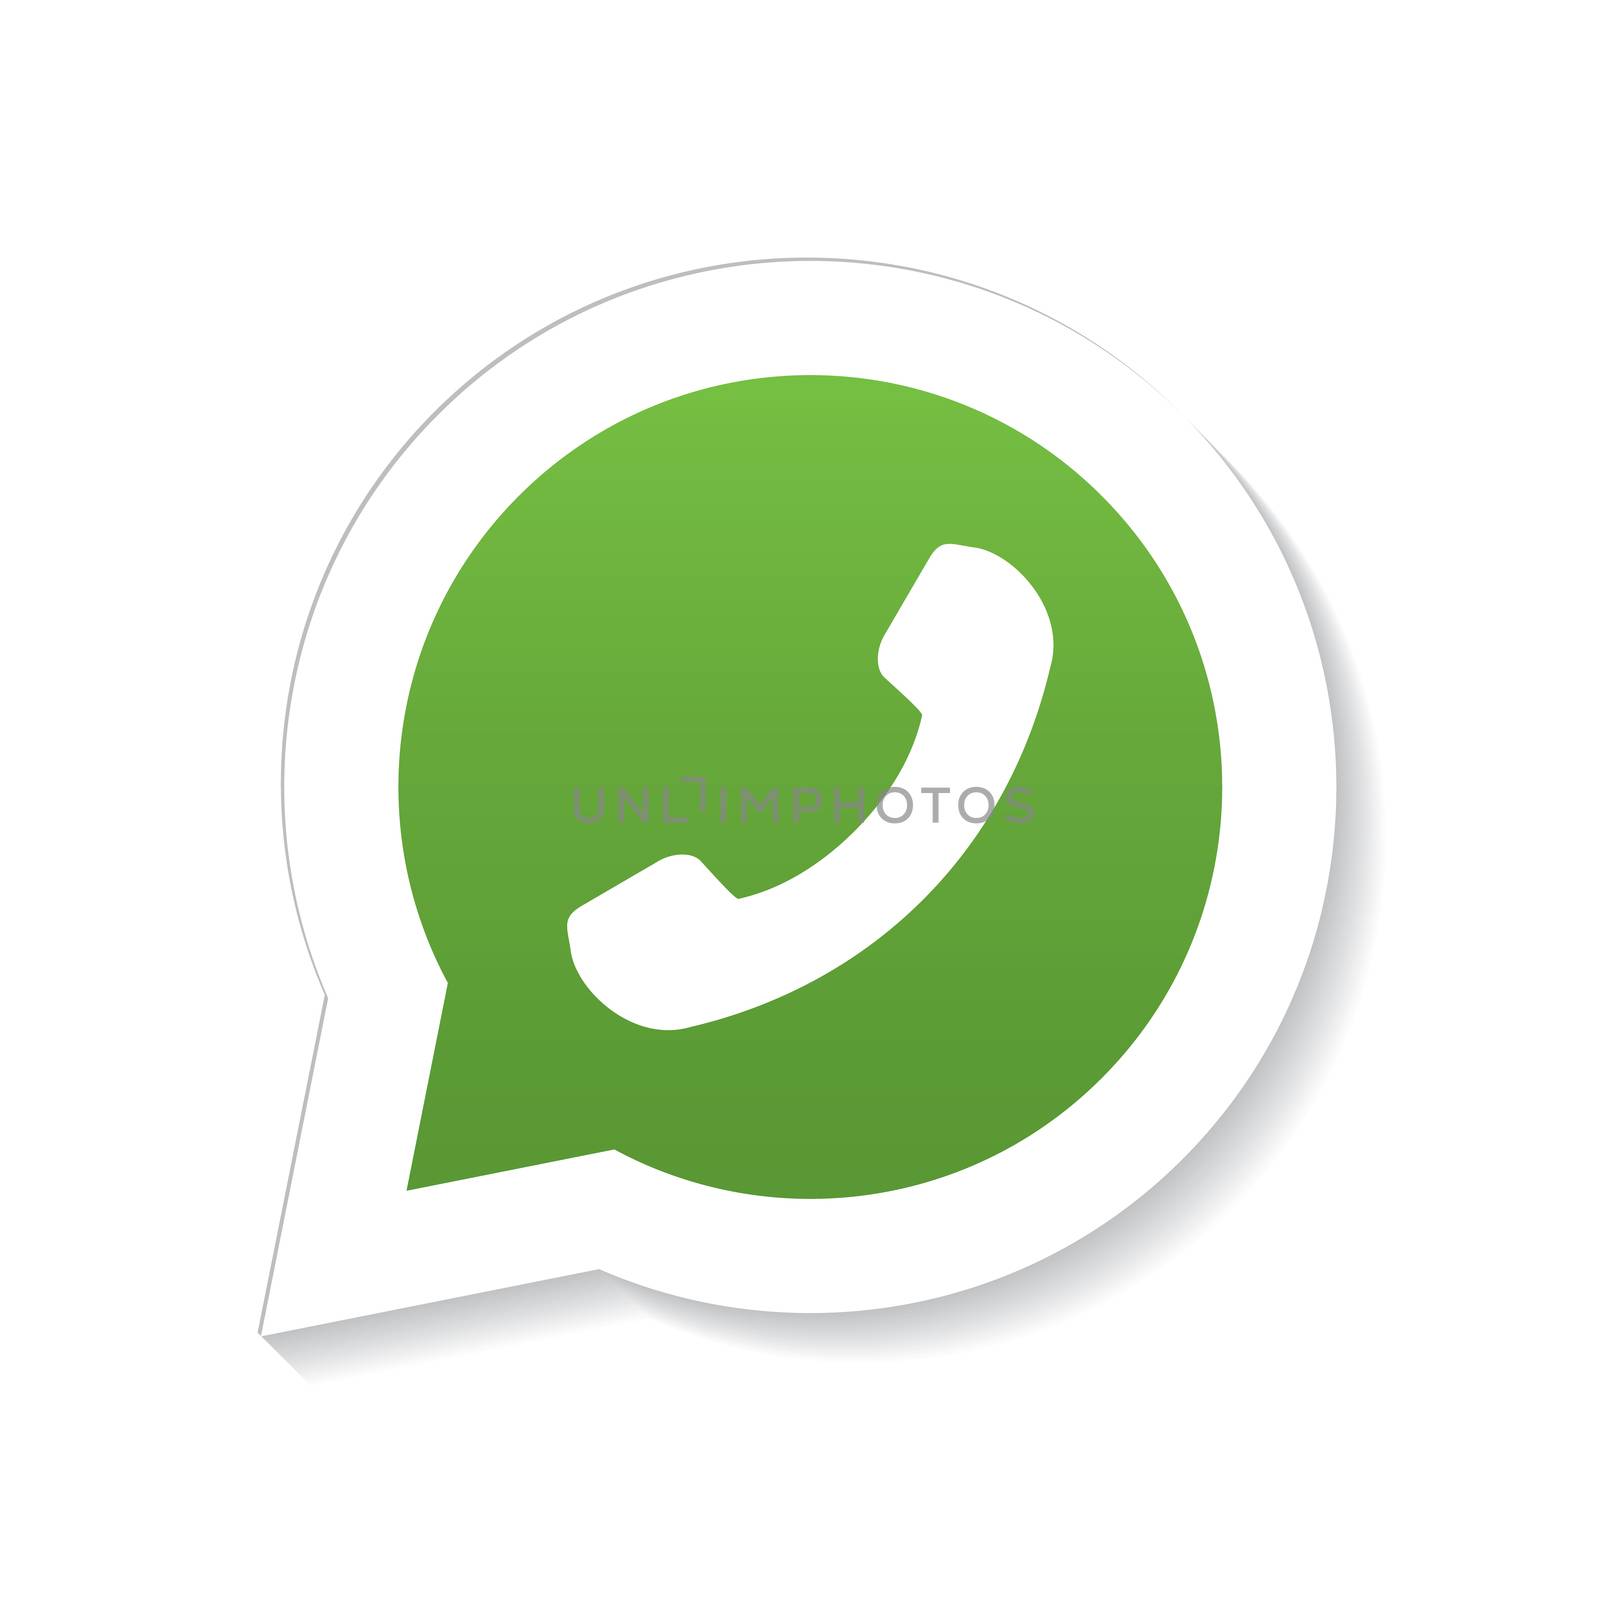 Green phone handset in speech bubble icon with fading shadow, isolated on white background.